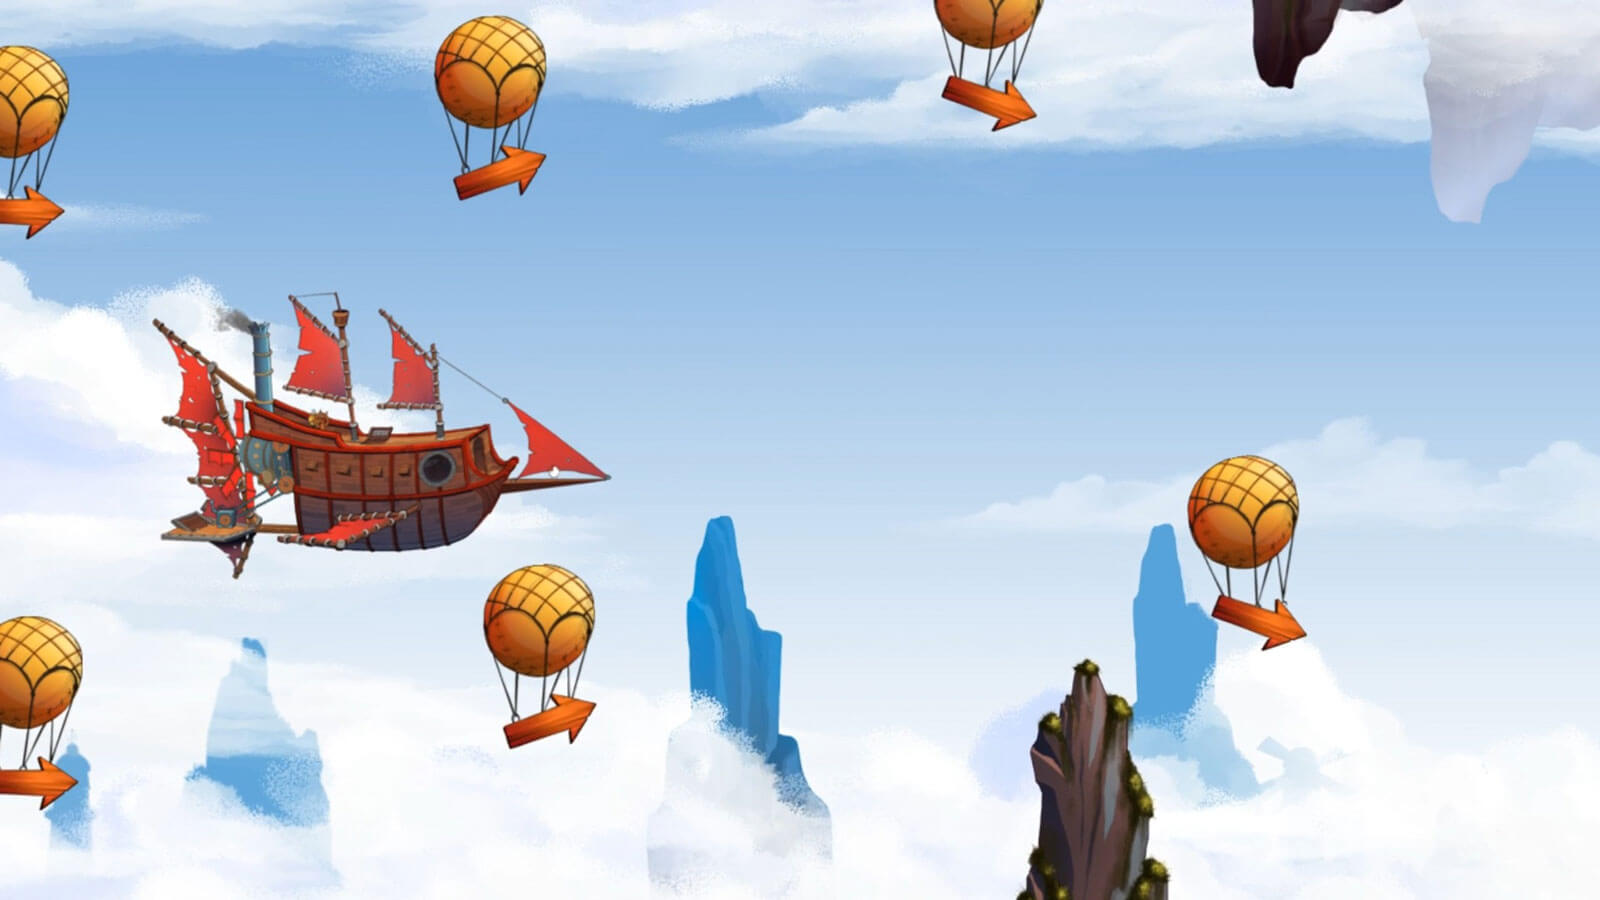 A pirate ship flies through the sky amongst balloons with arrows pointing to the right